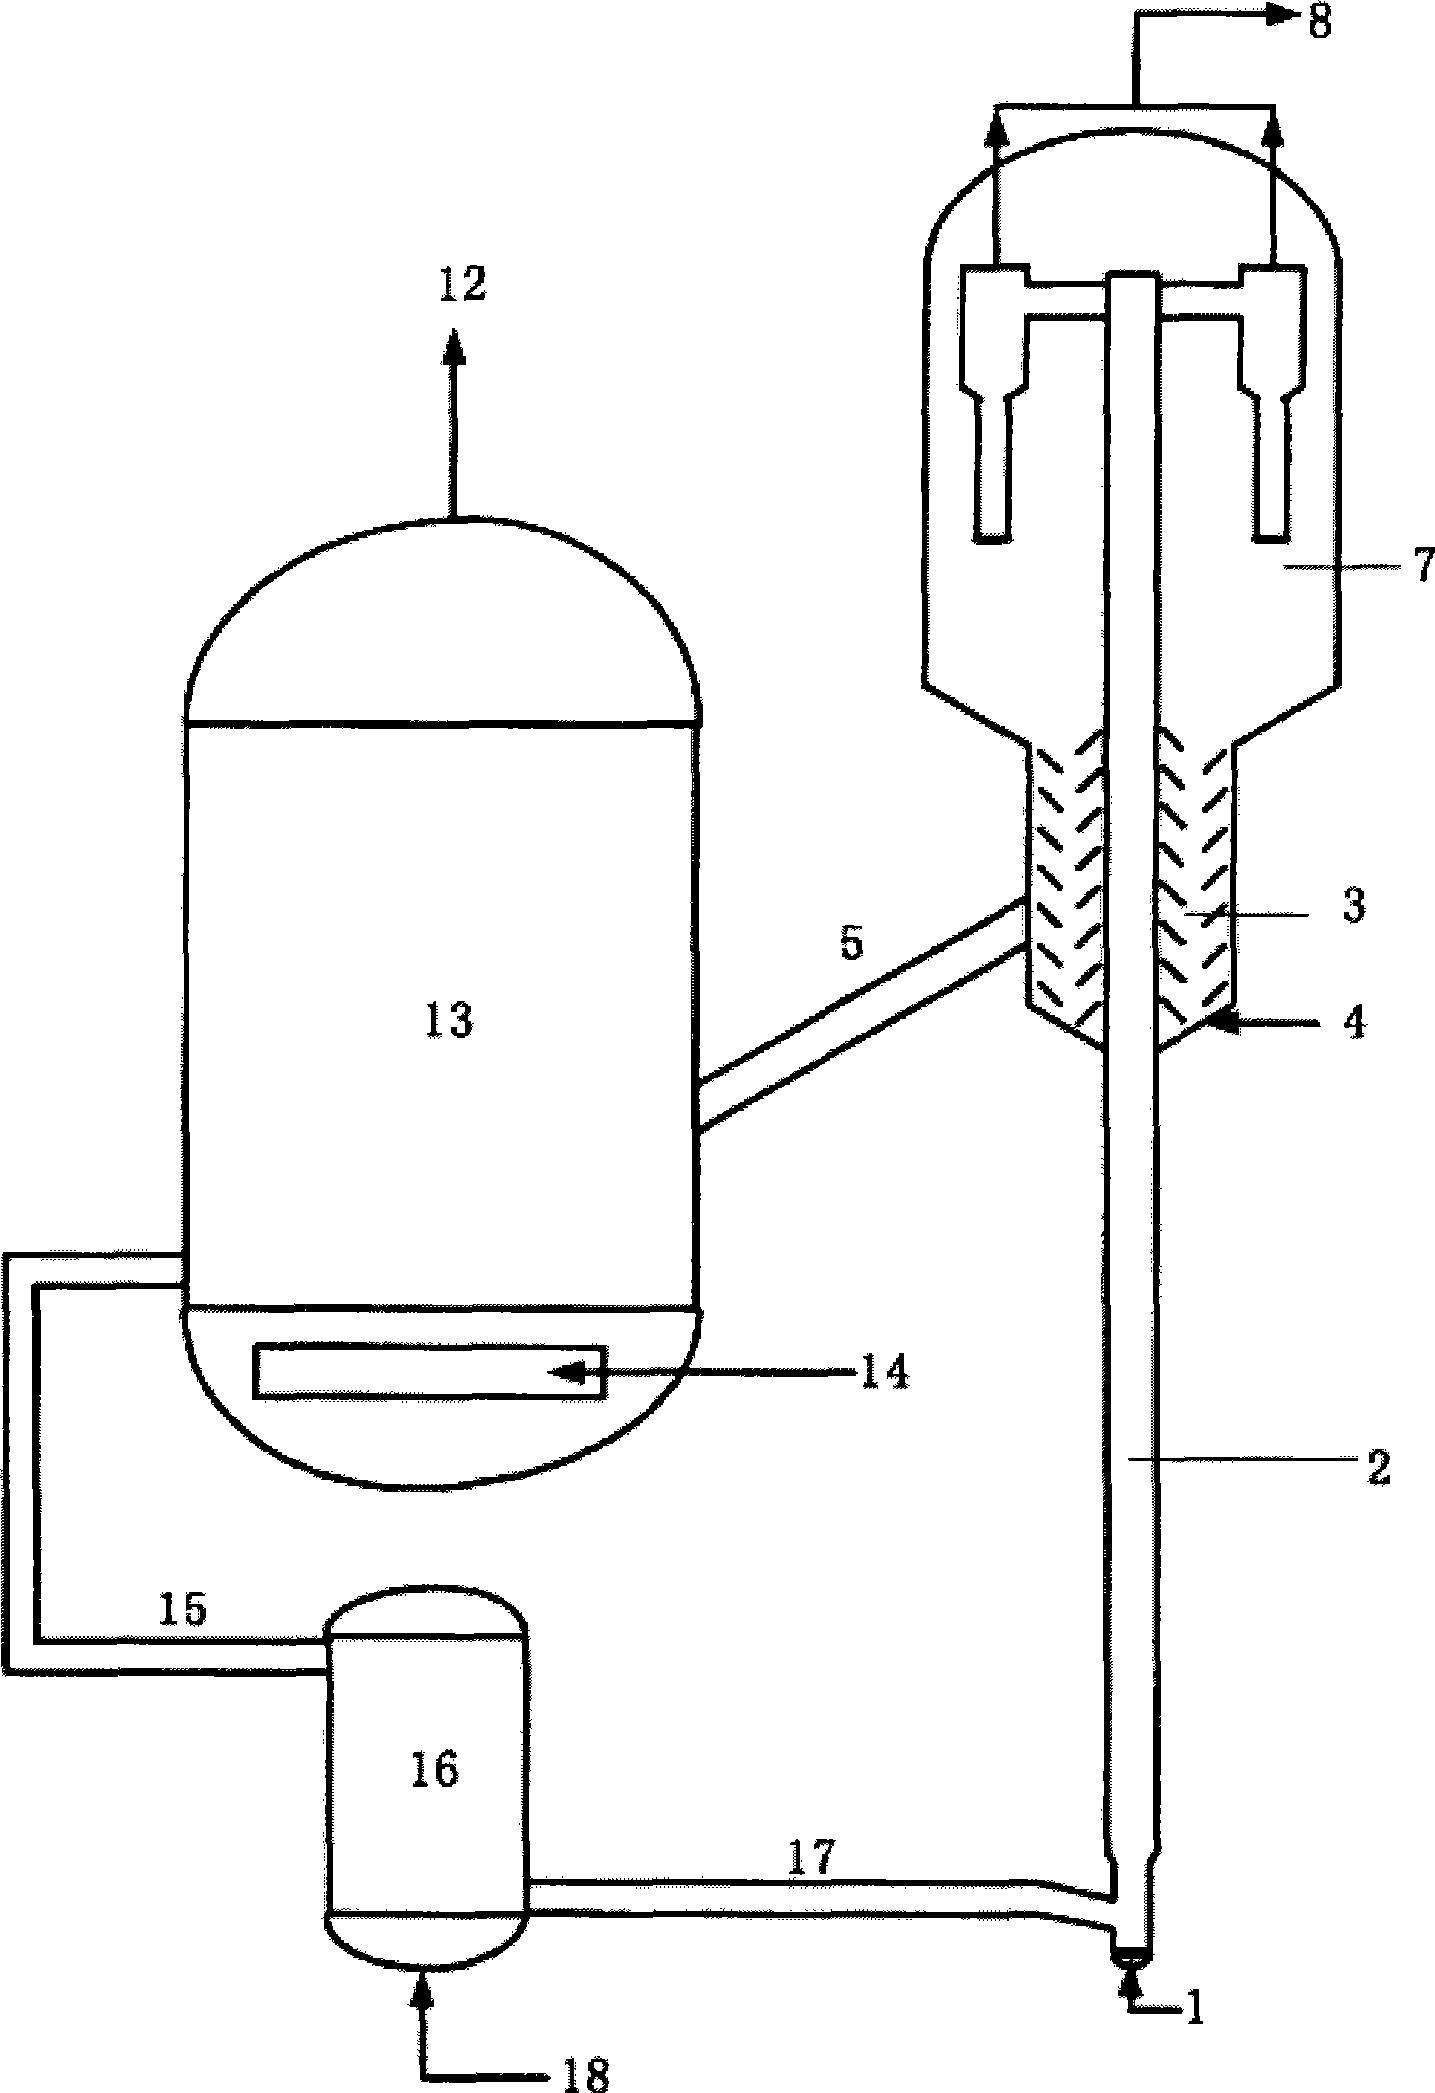 Method for reducing sulfide in light hydrocarbon oil